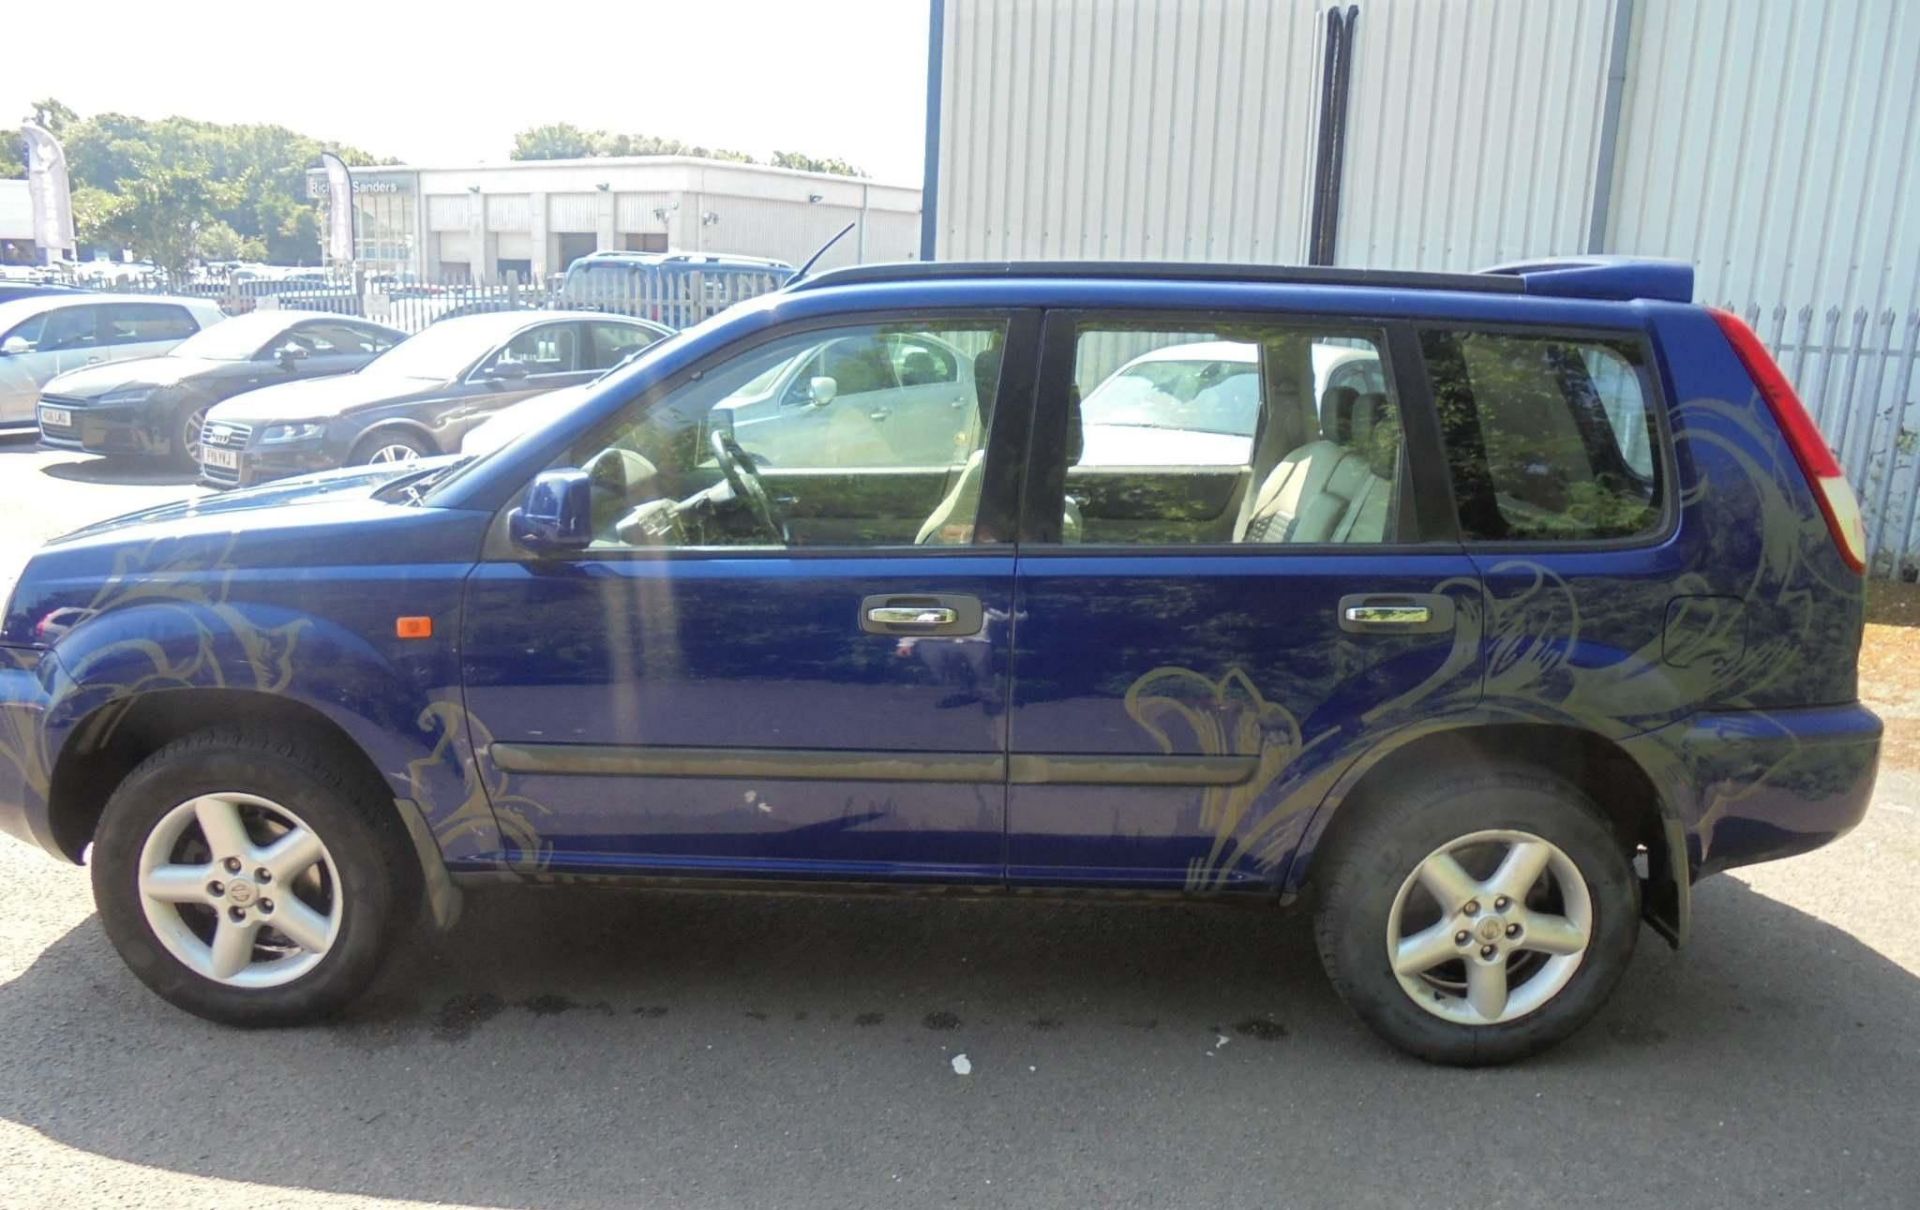 2002 Nissan Xtrail 2.0 Sport 5 Door 4x4 - CL505 - NO VAT ON THE HAMMER - Location: Corby, Northampto - Image 4 of 10